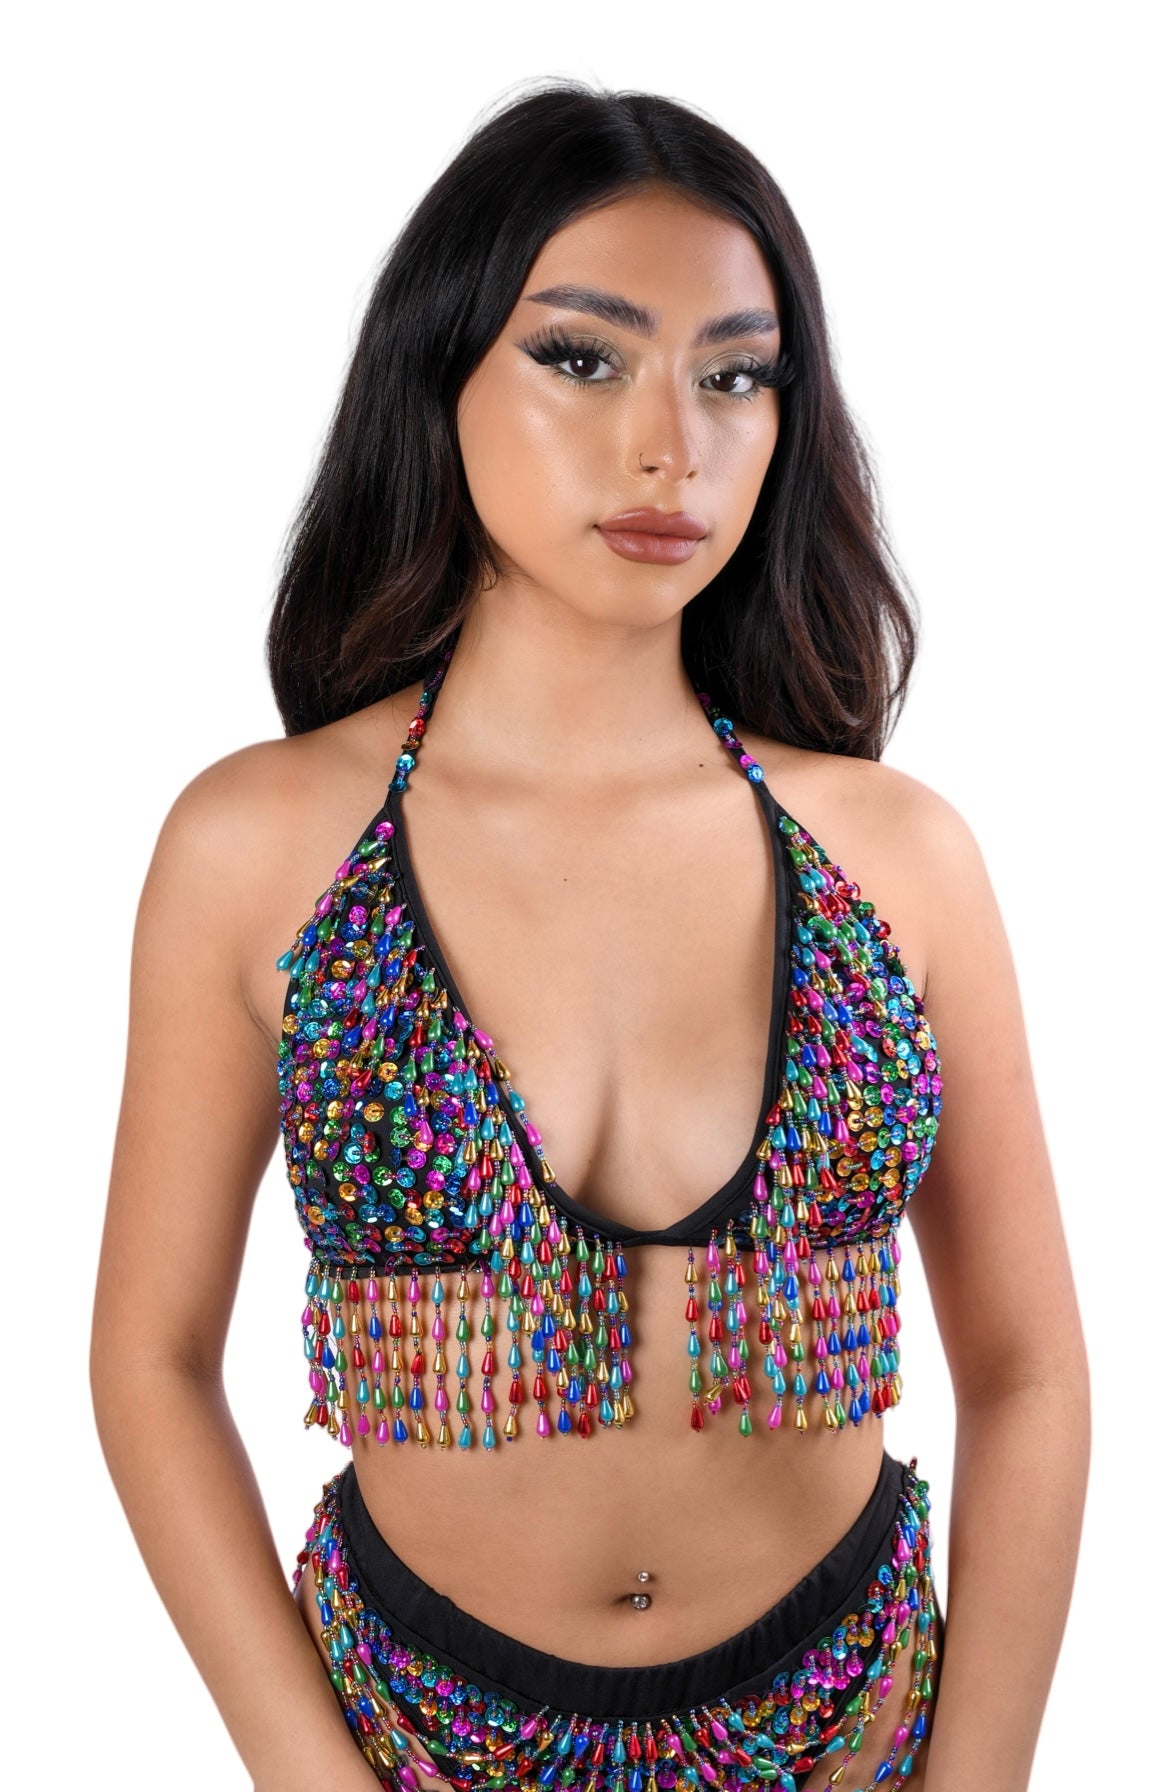 Hand Stitched Sequin Bra Top - Lucky Charms